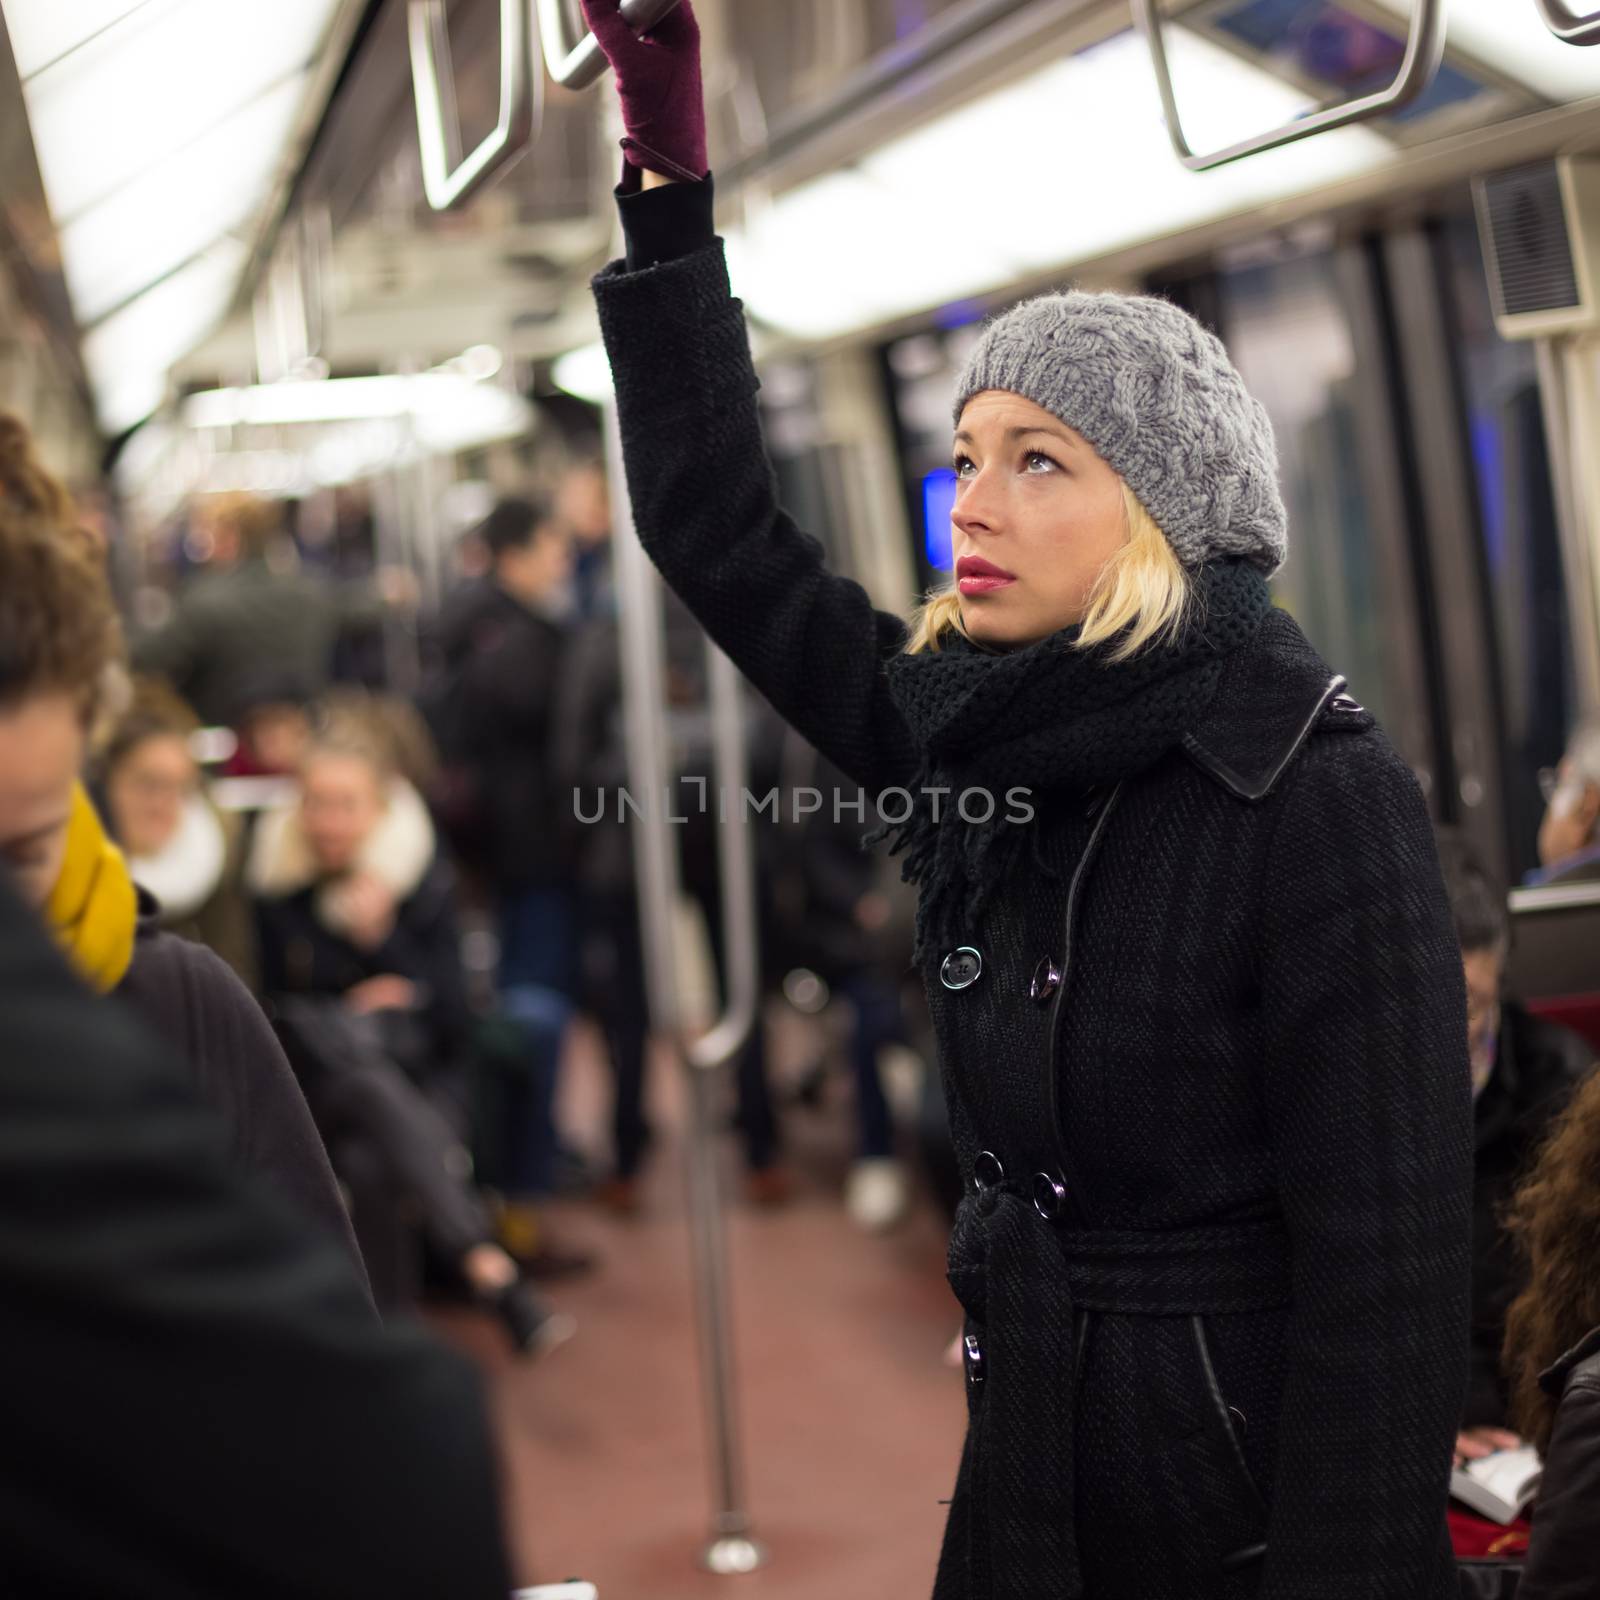 Woman on subway. by kasto